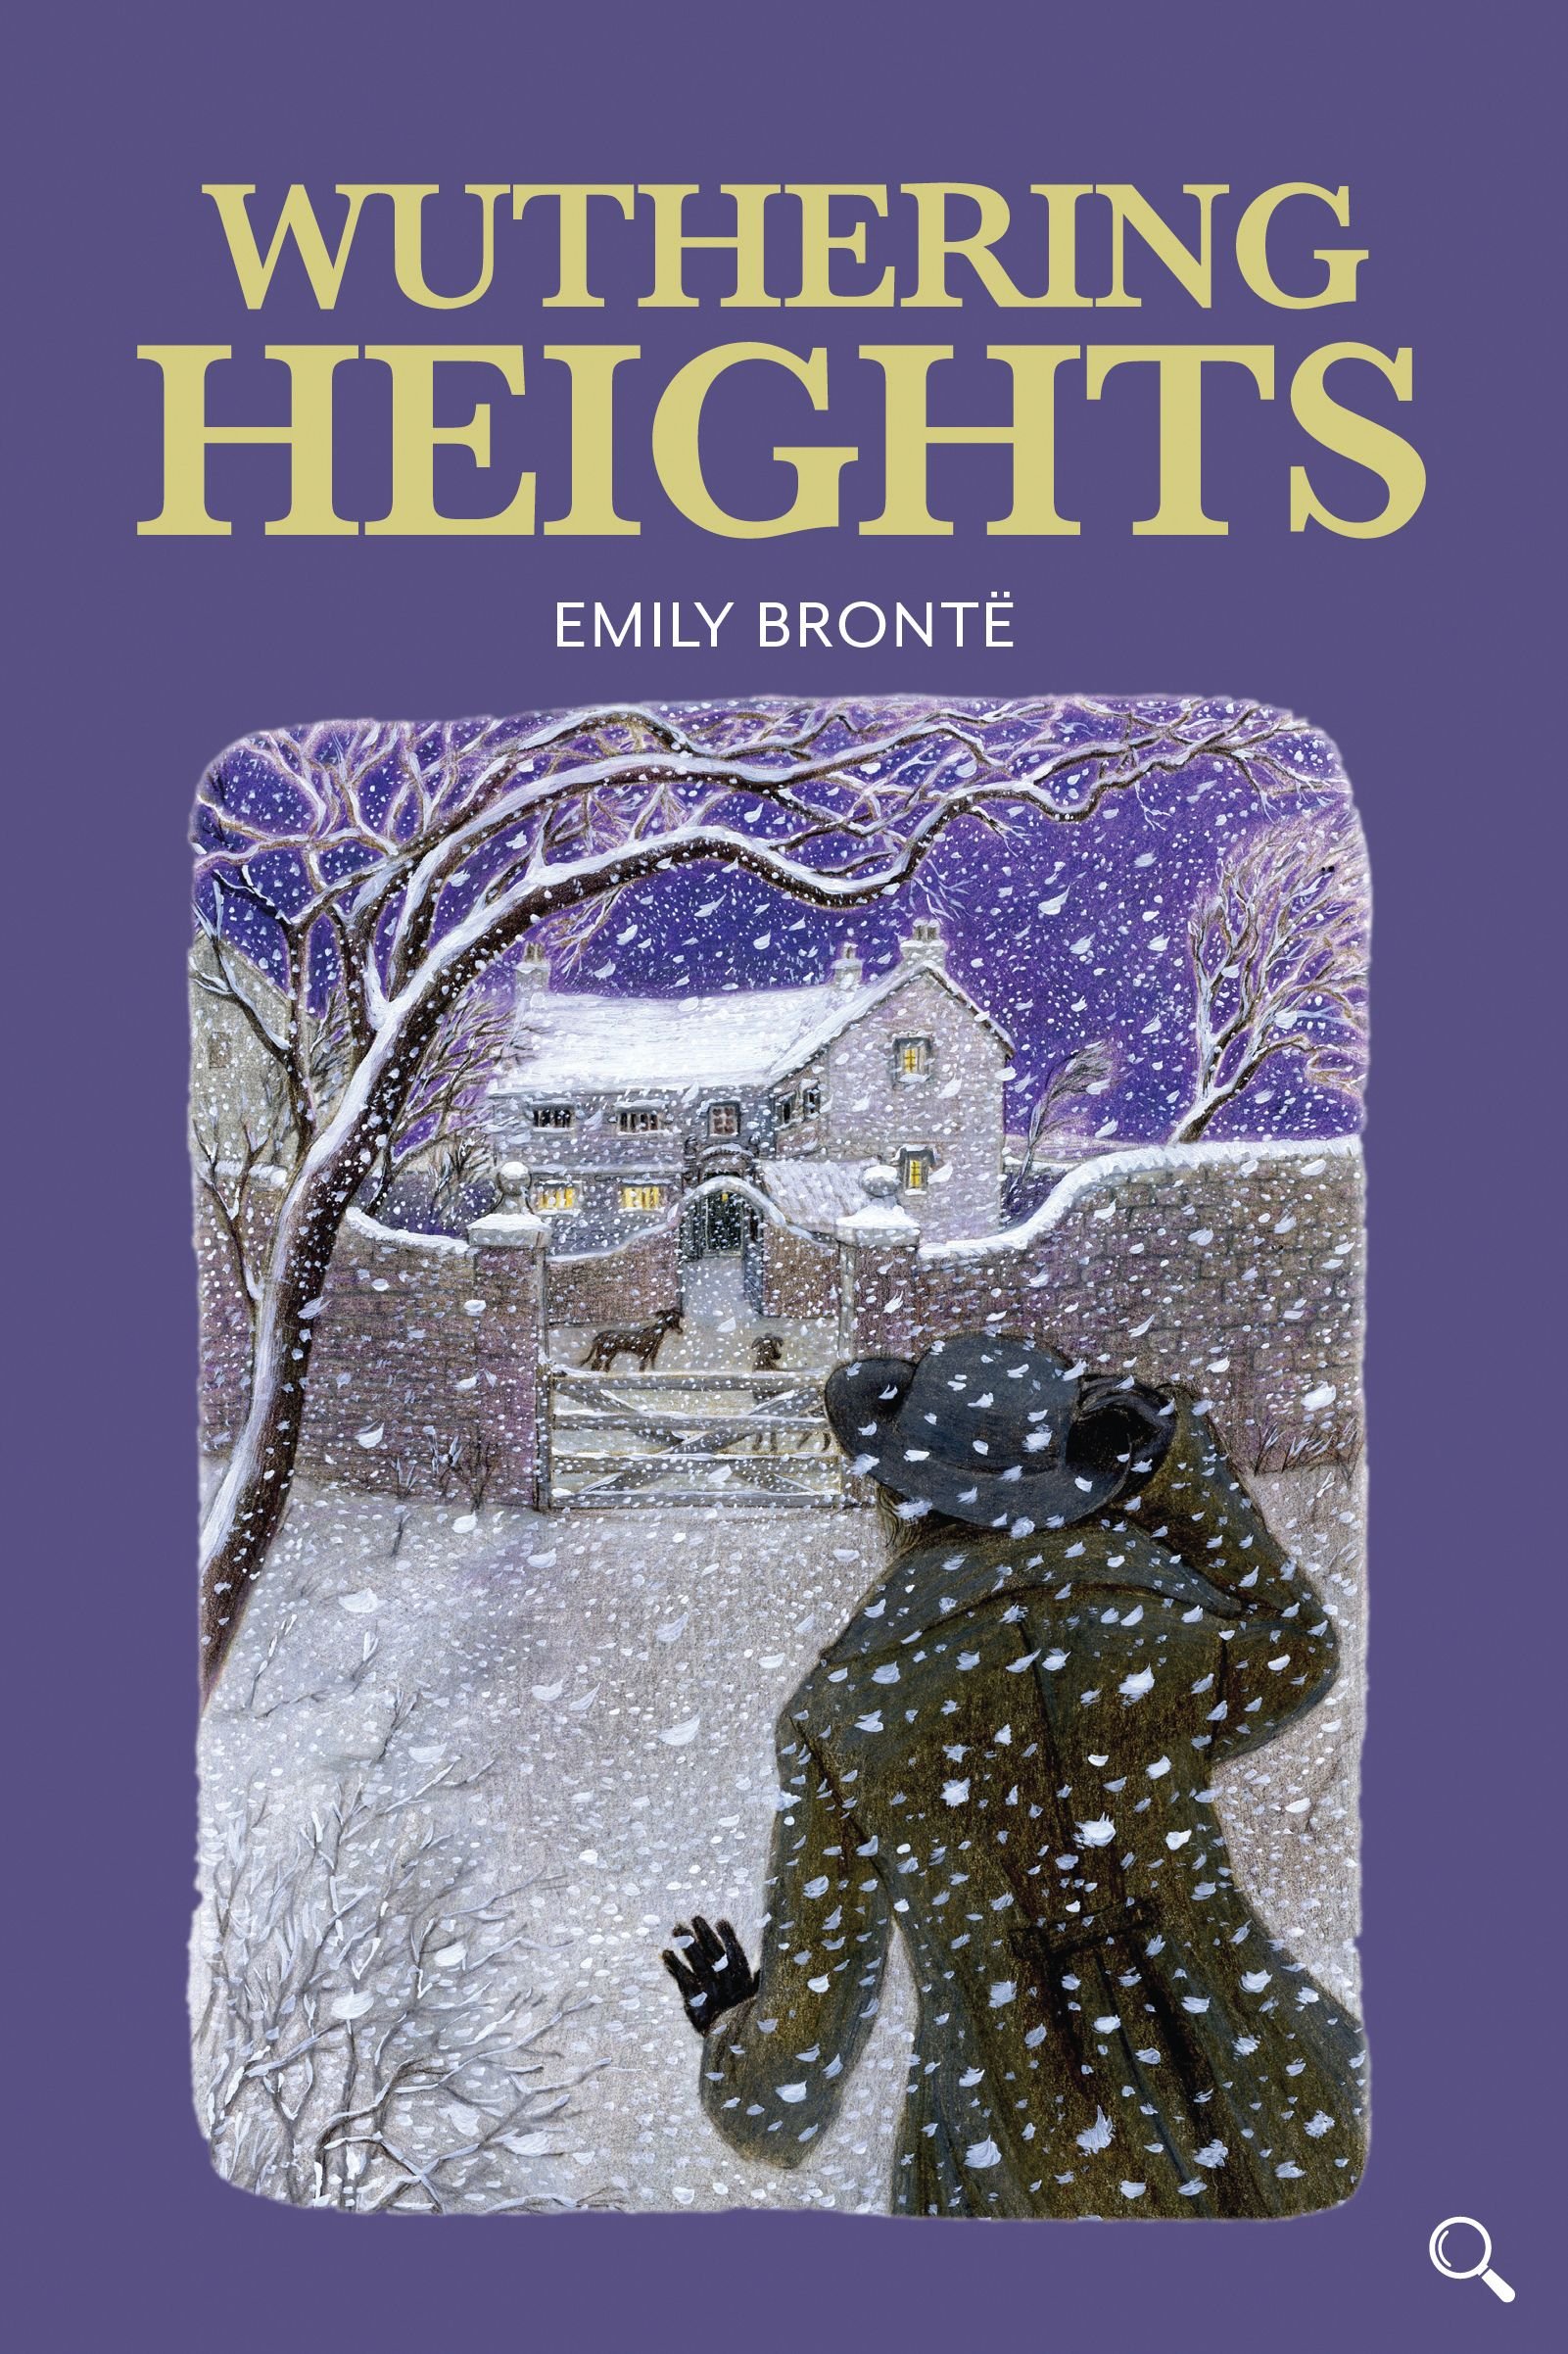 Buy Wuthering Heights by Emily Bronte With Free Delivery